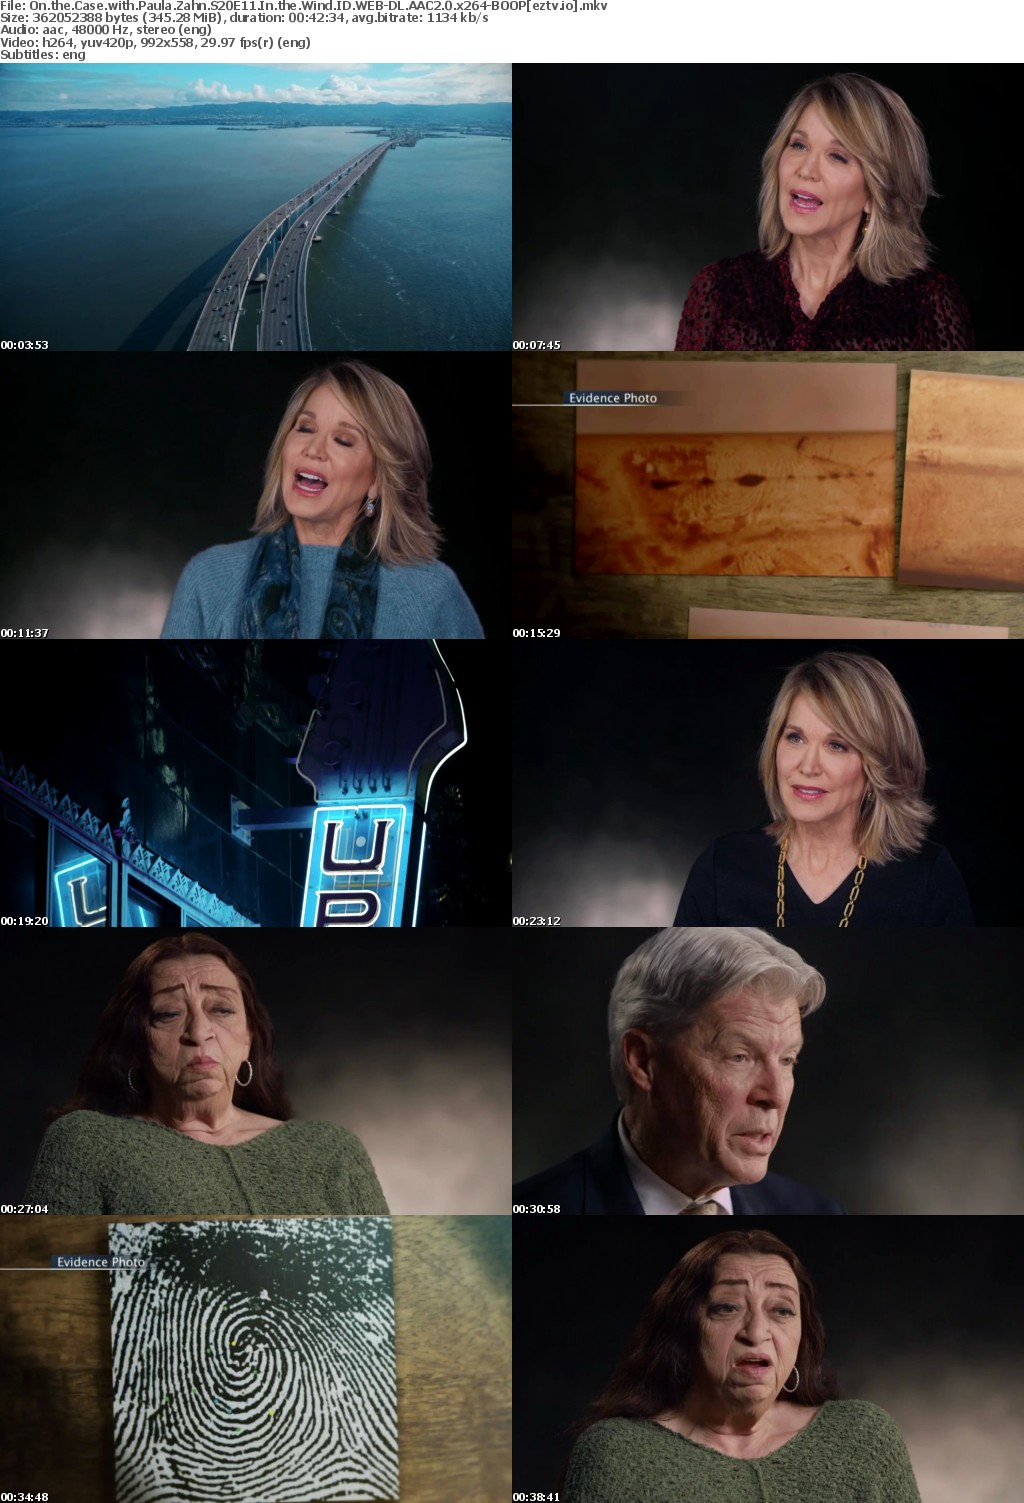 On the Case with Paula Zahn S20E11 In the Wind ID WEB-DL AAC2 0 x264-BOOP